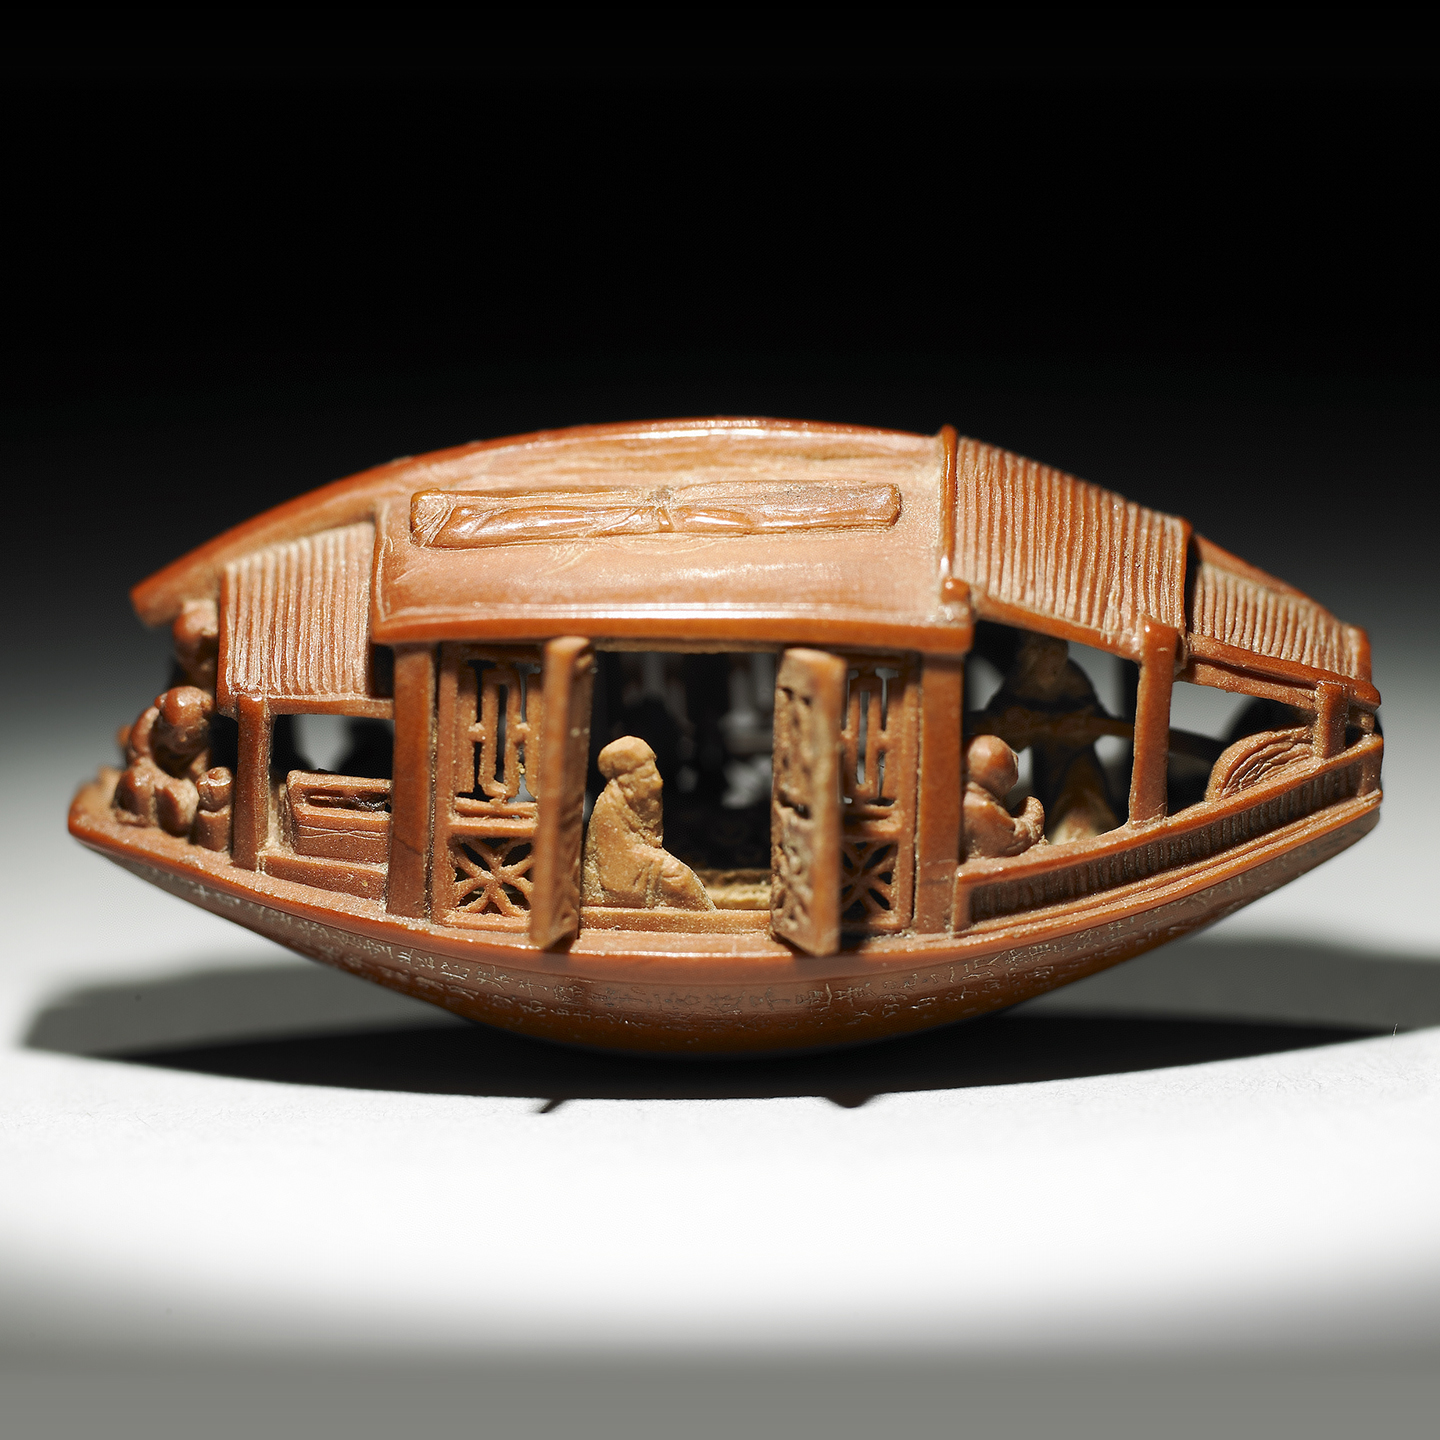 Carved olive pit in the form of a boat